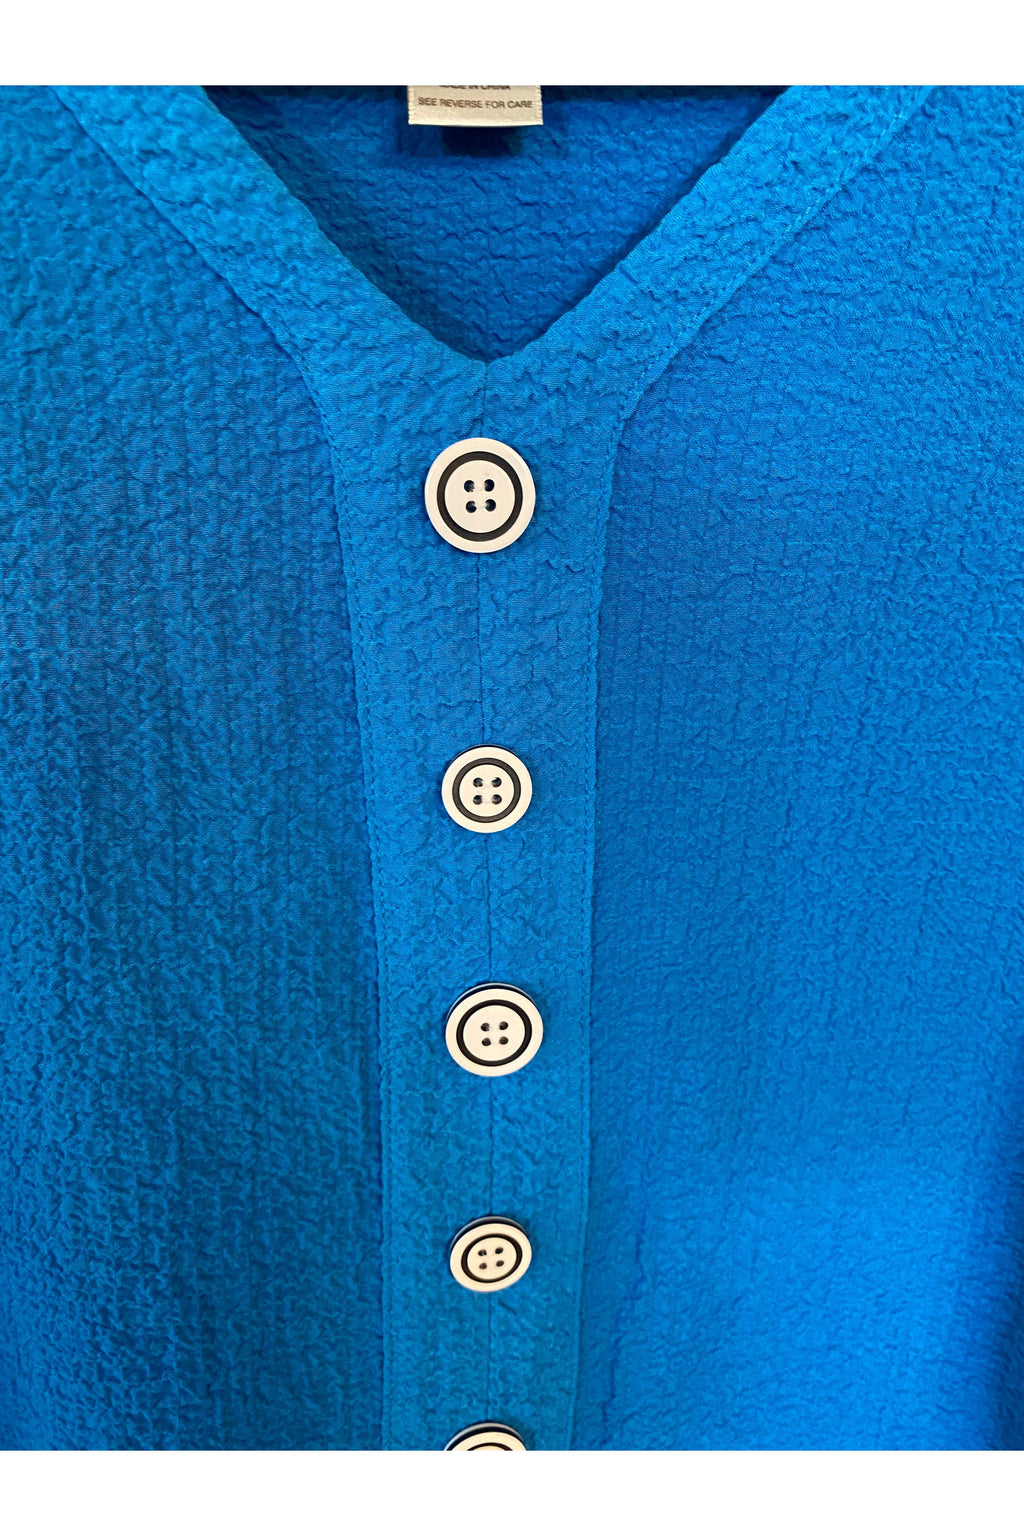 Multiples - 3/4 Sleeve with Buttons - V-Neck Button Front Top - Bluast - M12114TM, M12114TW